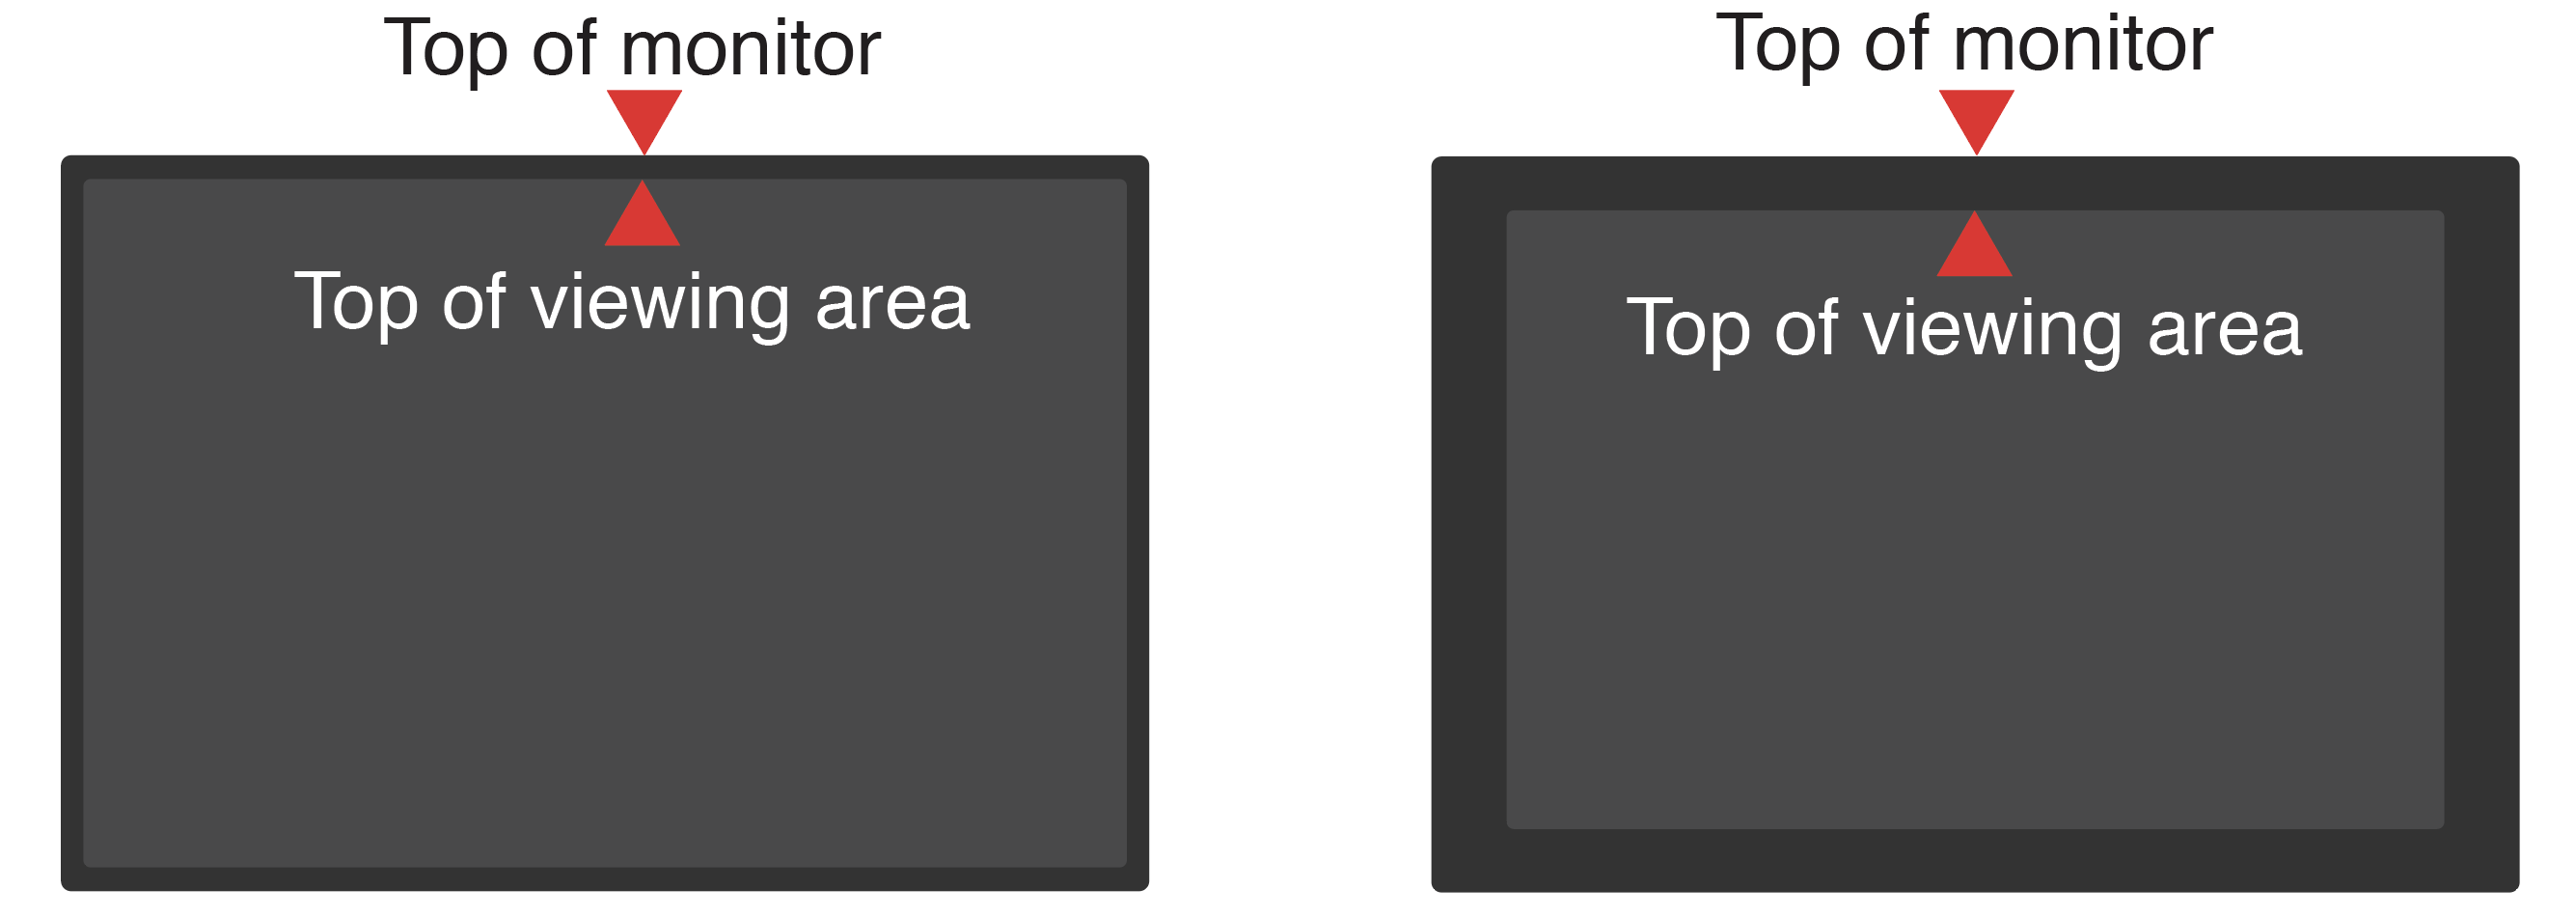 Illustration showing the difference between the top of the monitor and the top of the viewing area